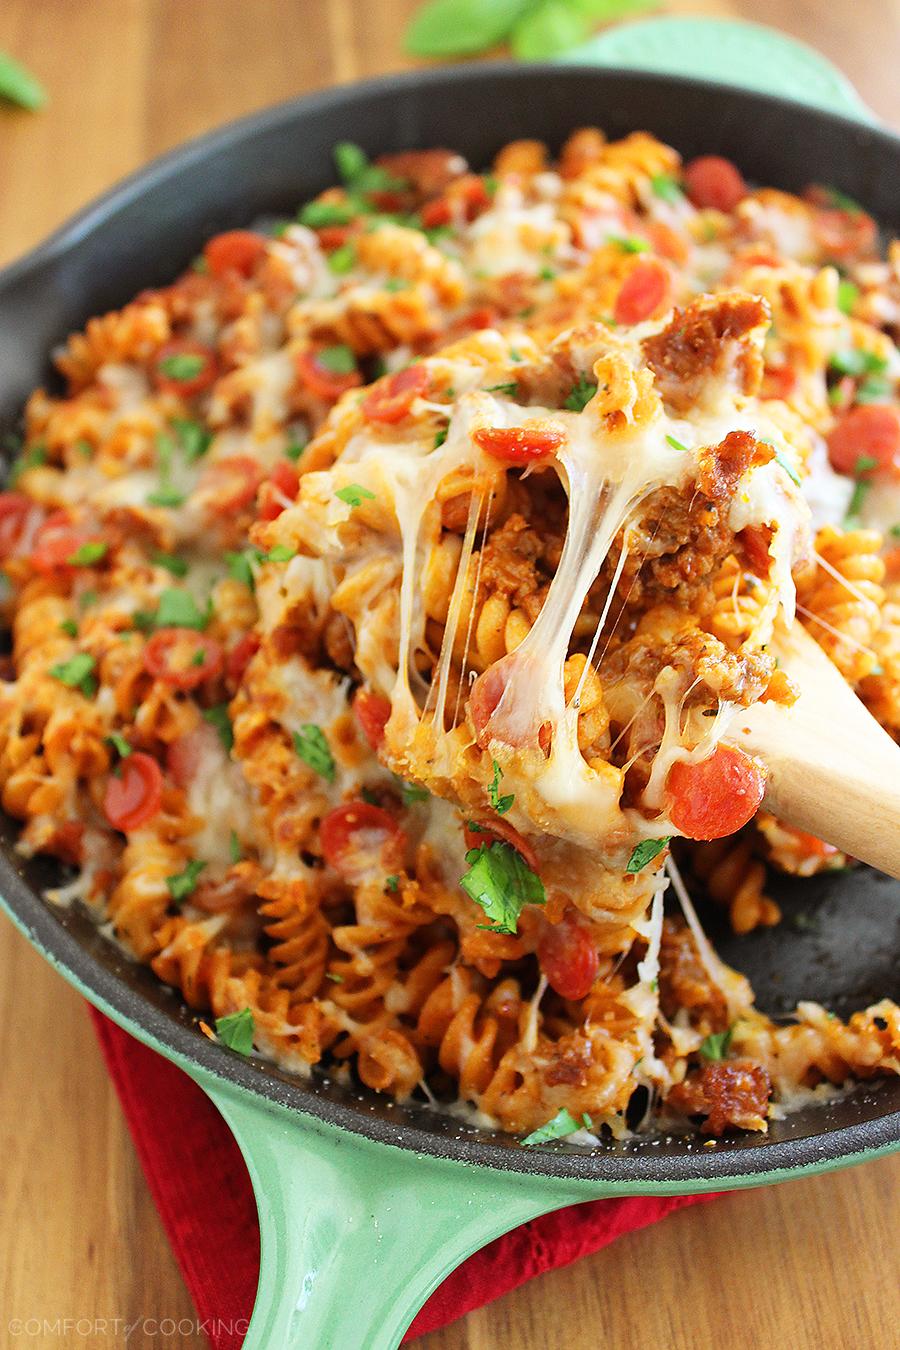 Cheesy Skillet Pizza Pasta The Comfort of Cooking